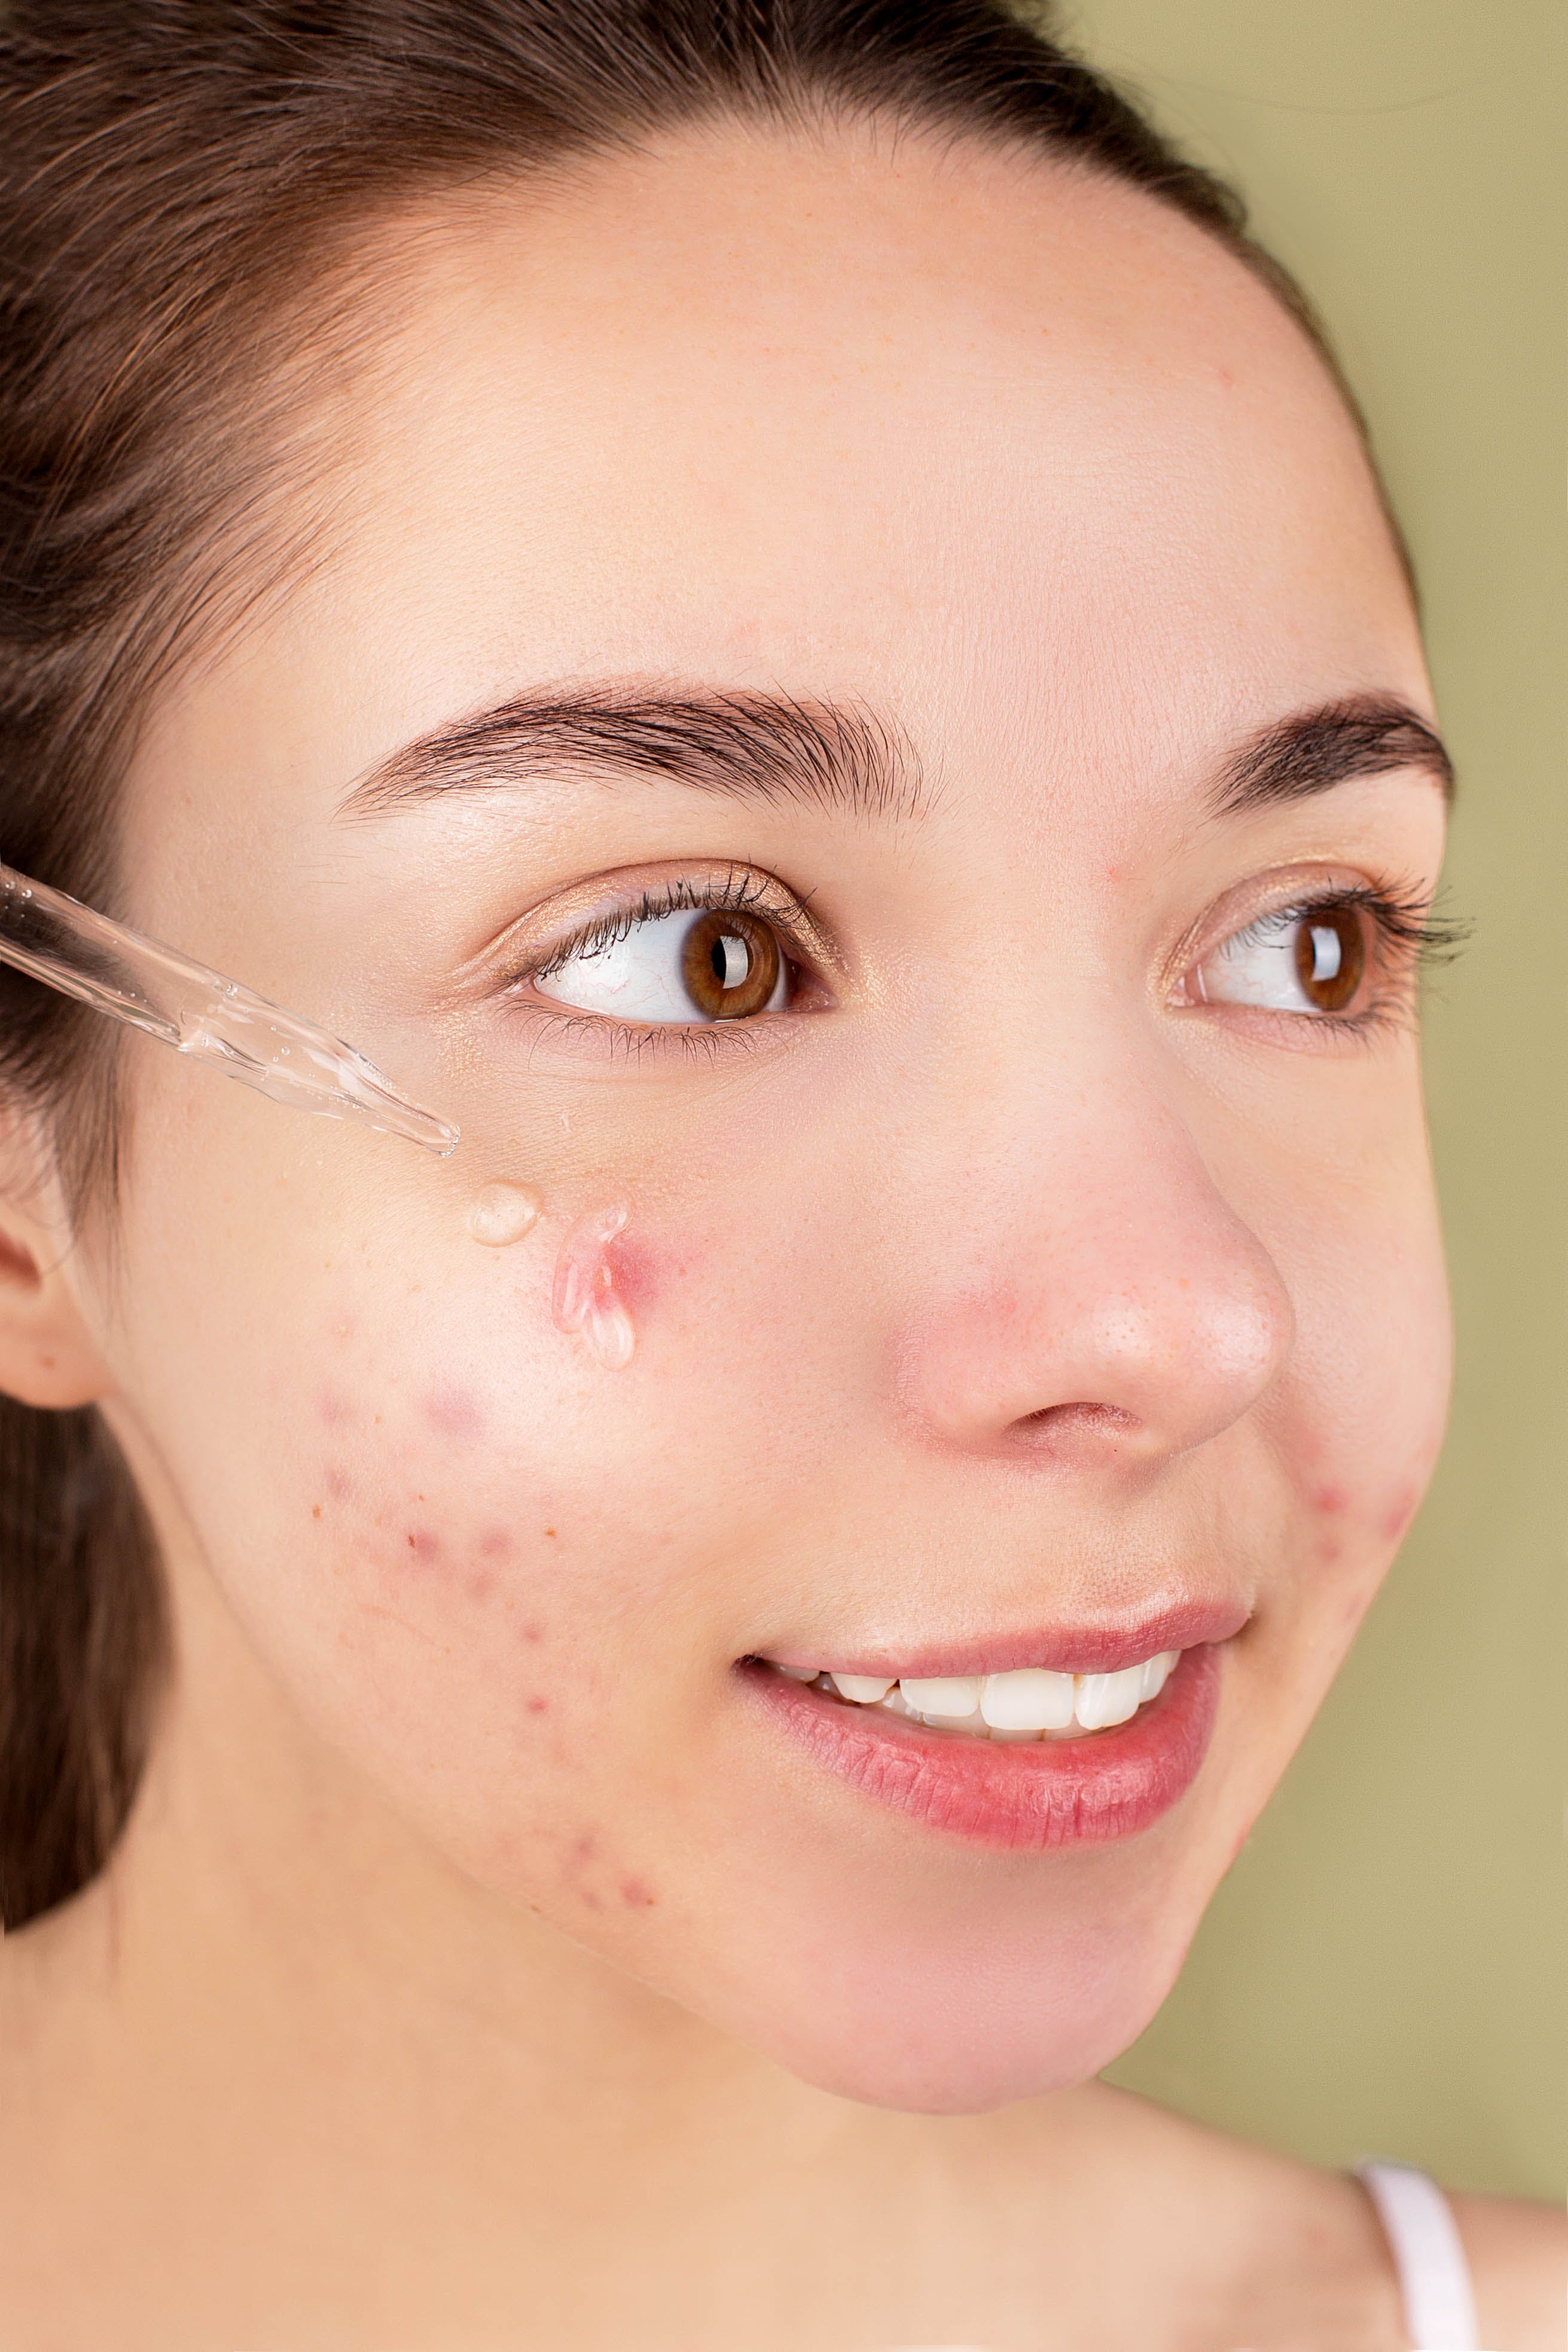 Types & Scar Treatments - Preventing Acne Scars